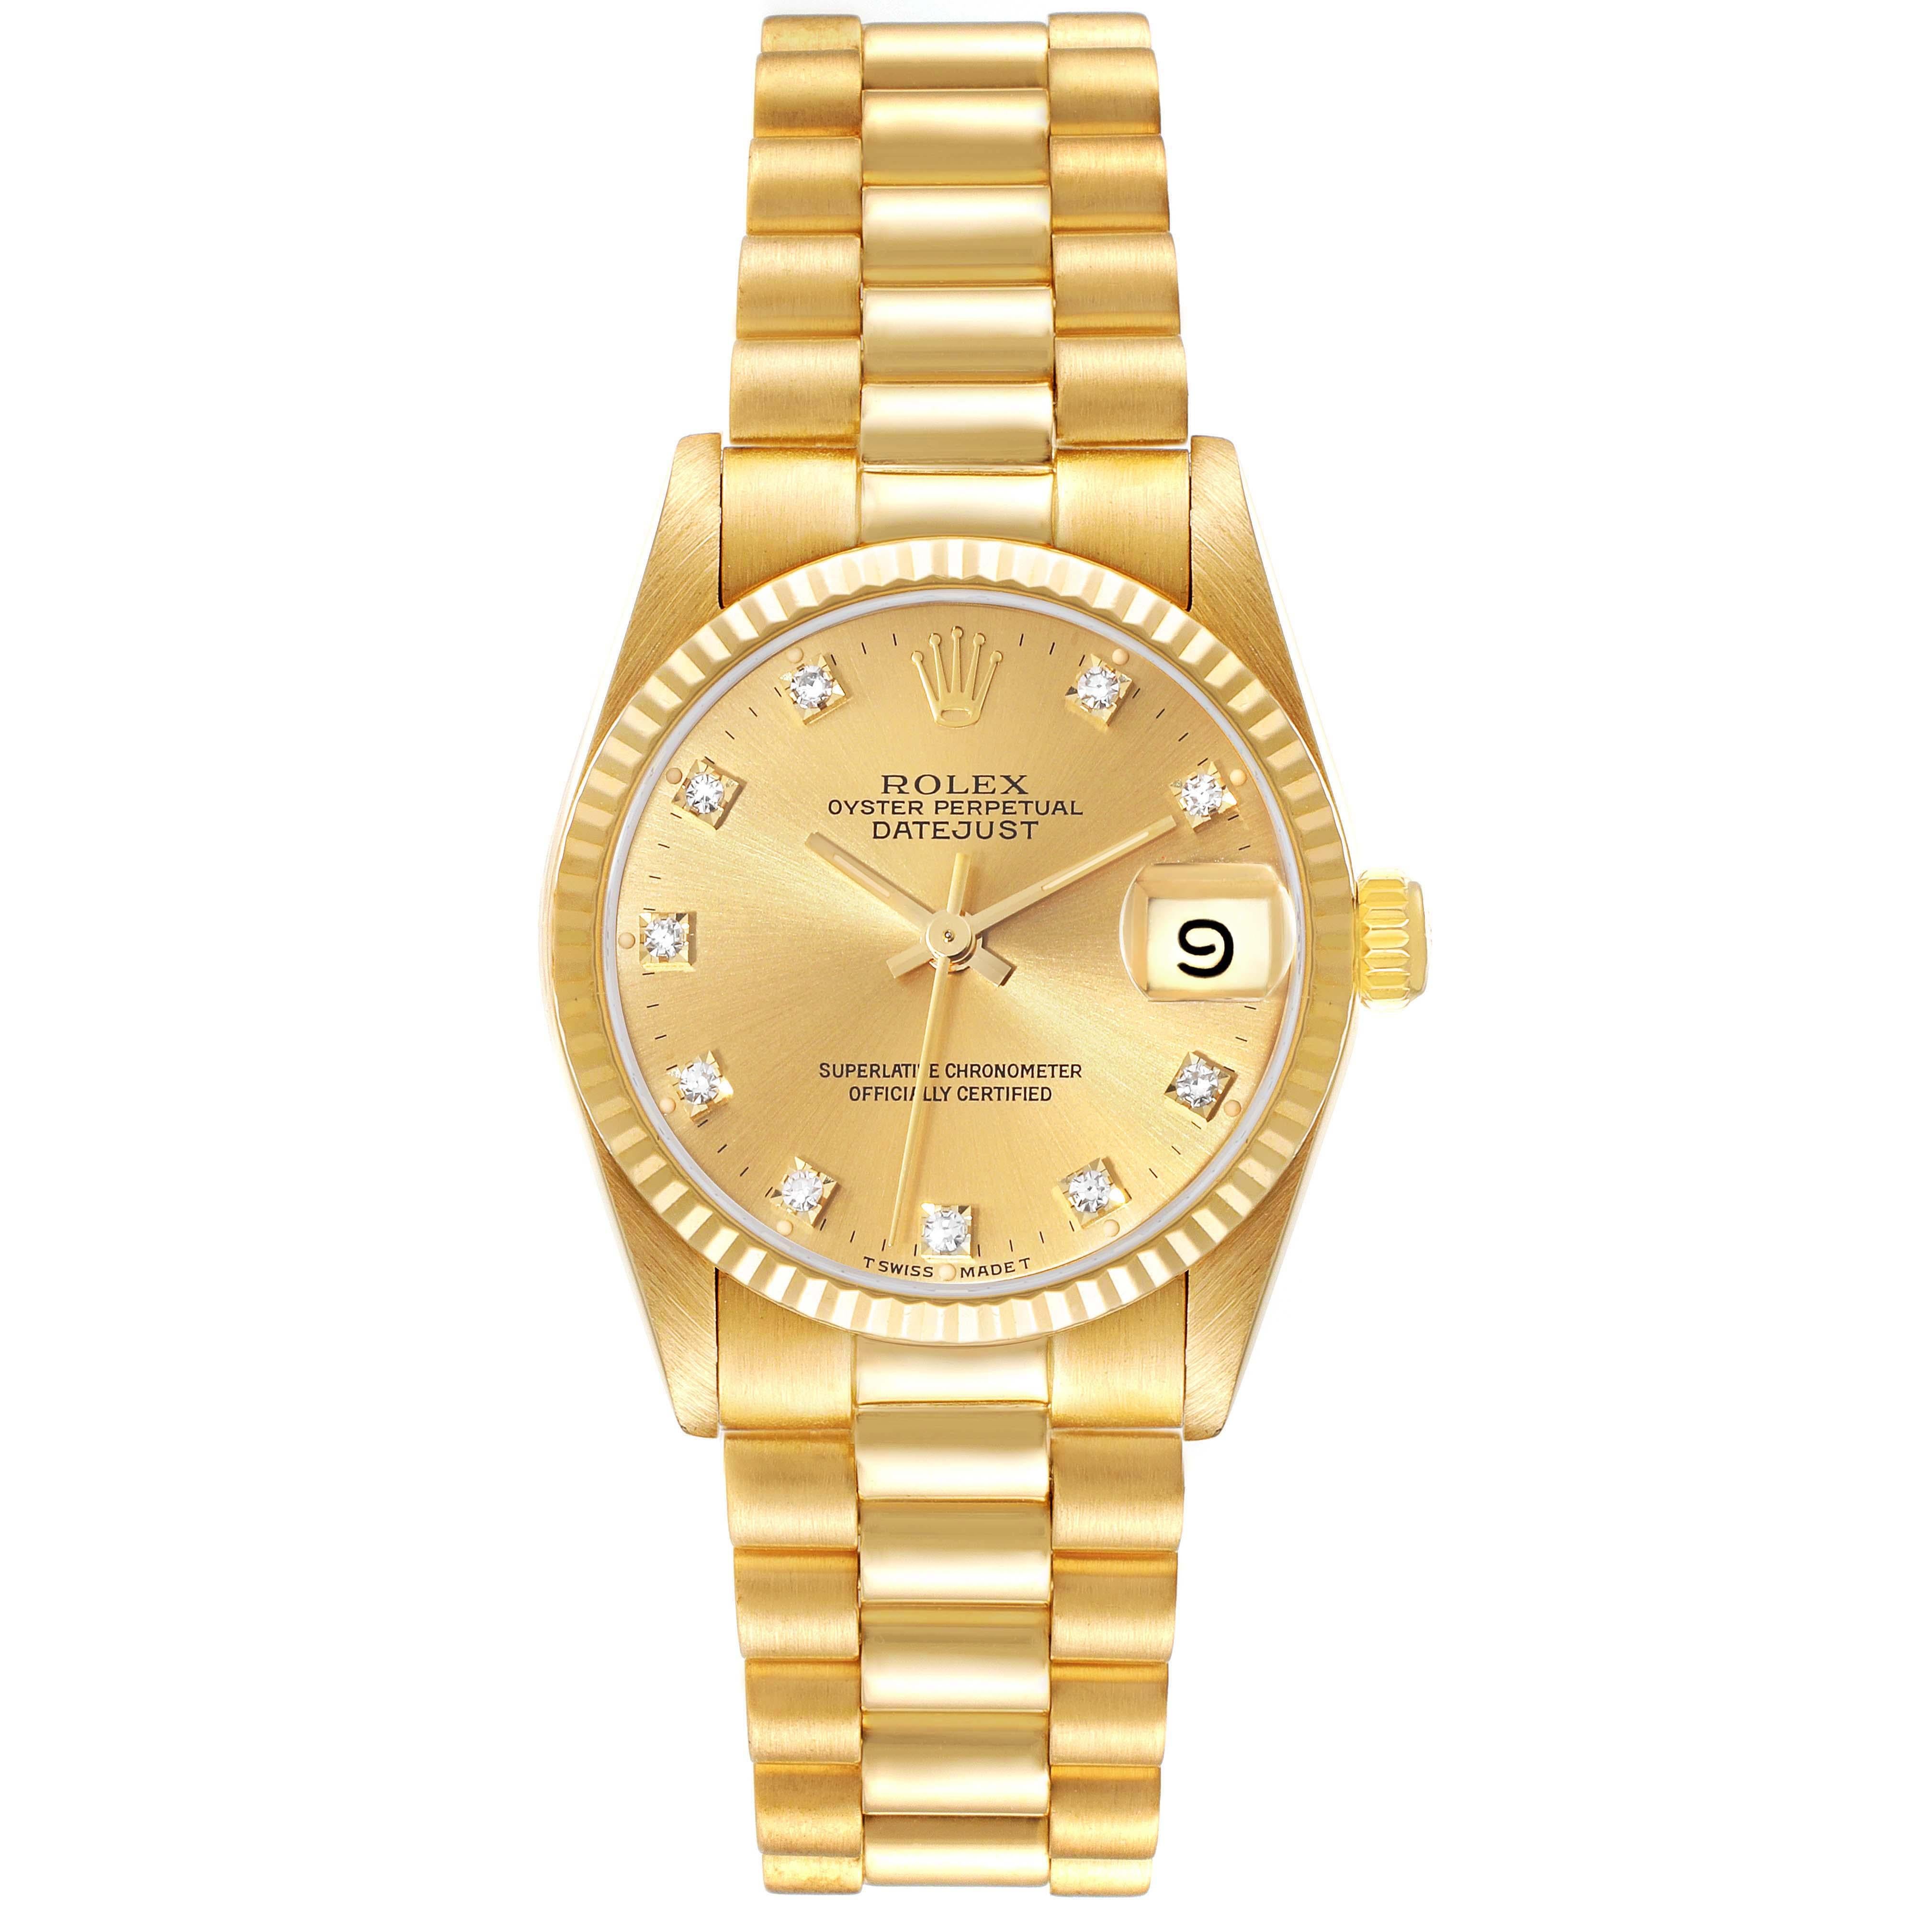 Rolex President Midsize Yellow Gold Diamond Dial Ladies Watch 68278. Officially certified chronometer automatic self-winding movement. 18k yellow gold oyster case 31.0 mm in diameter. Rolex logo on the crown. 18k yellow gold fluted bezel.